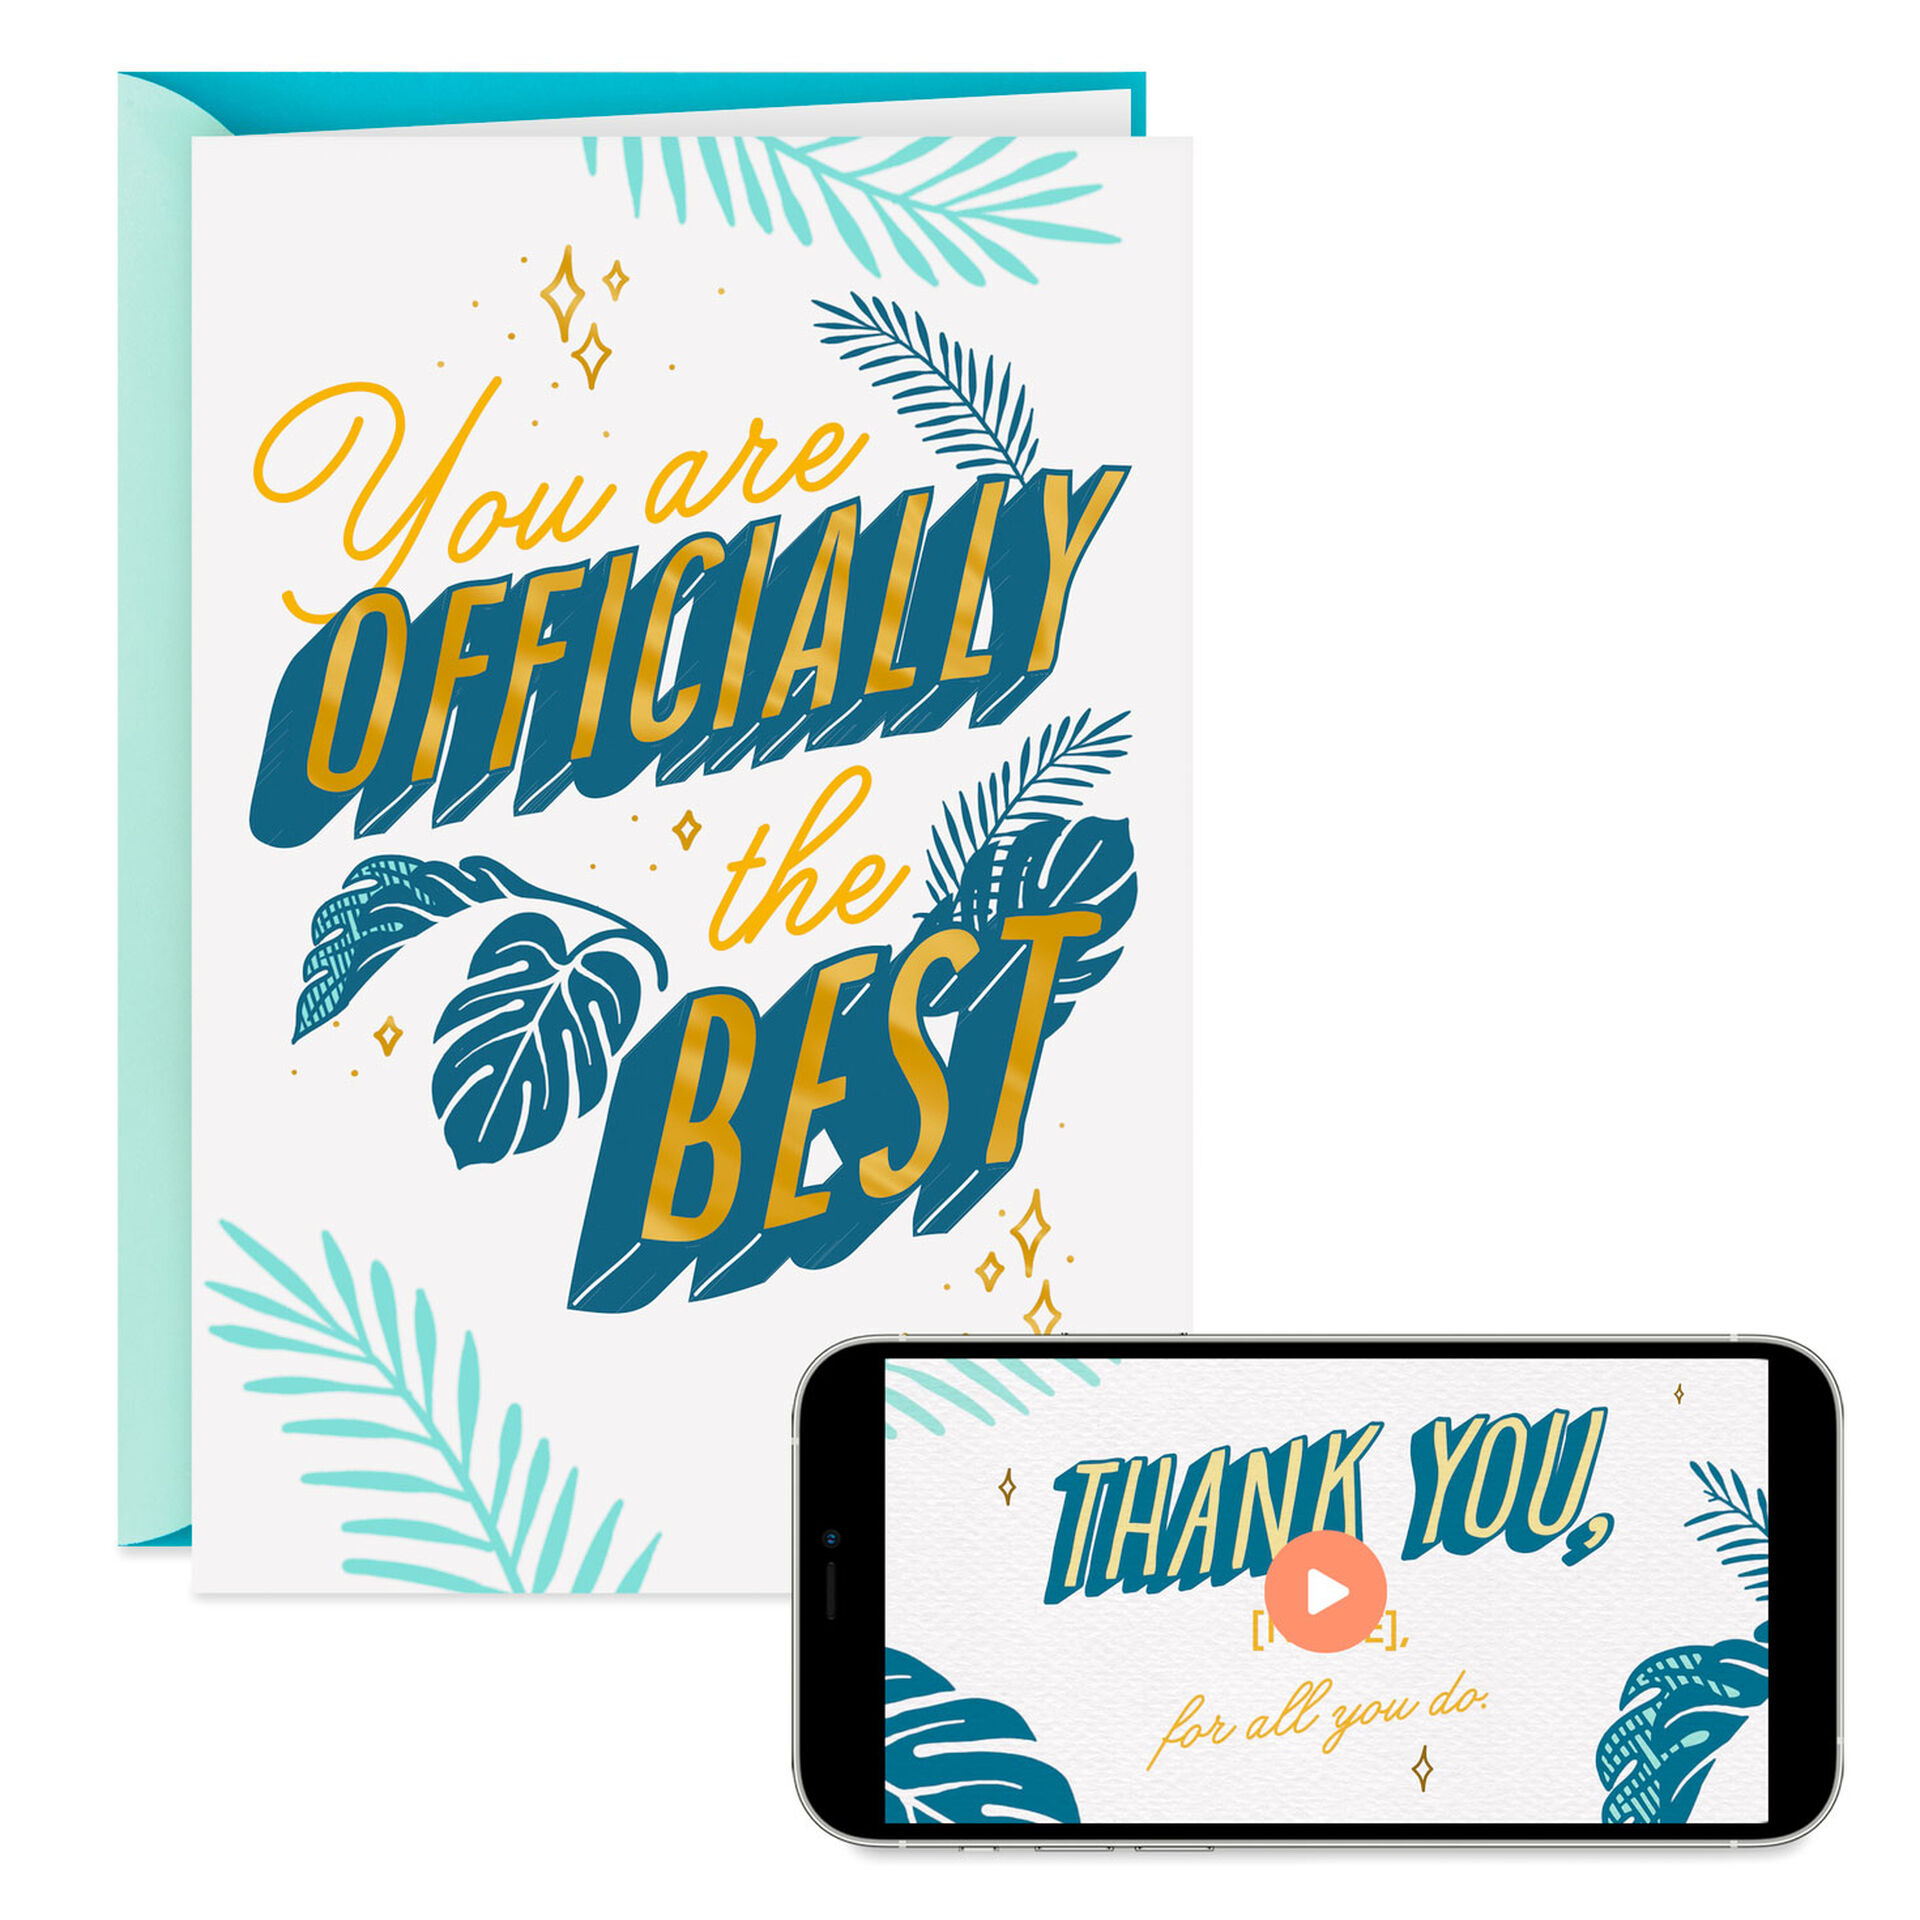 Leaves-Youre-the-Best-Video-Greeting-ThankYou-Card_599NVG1019_01